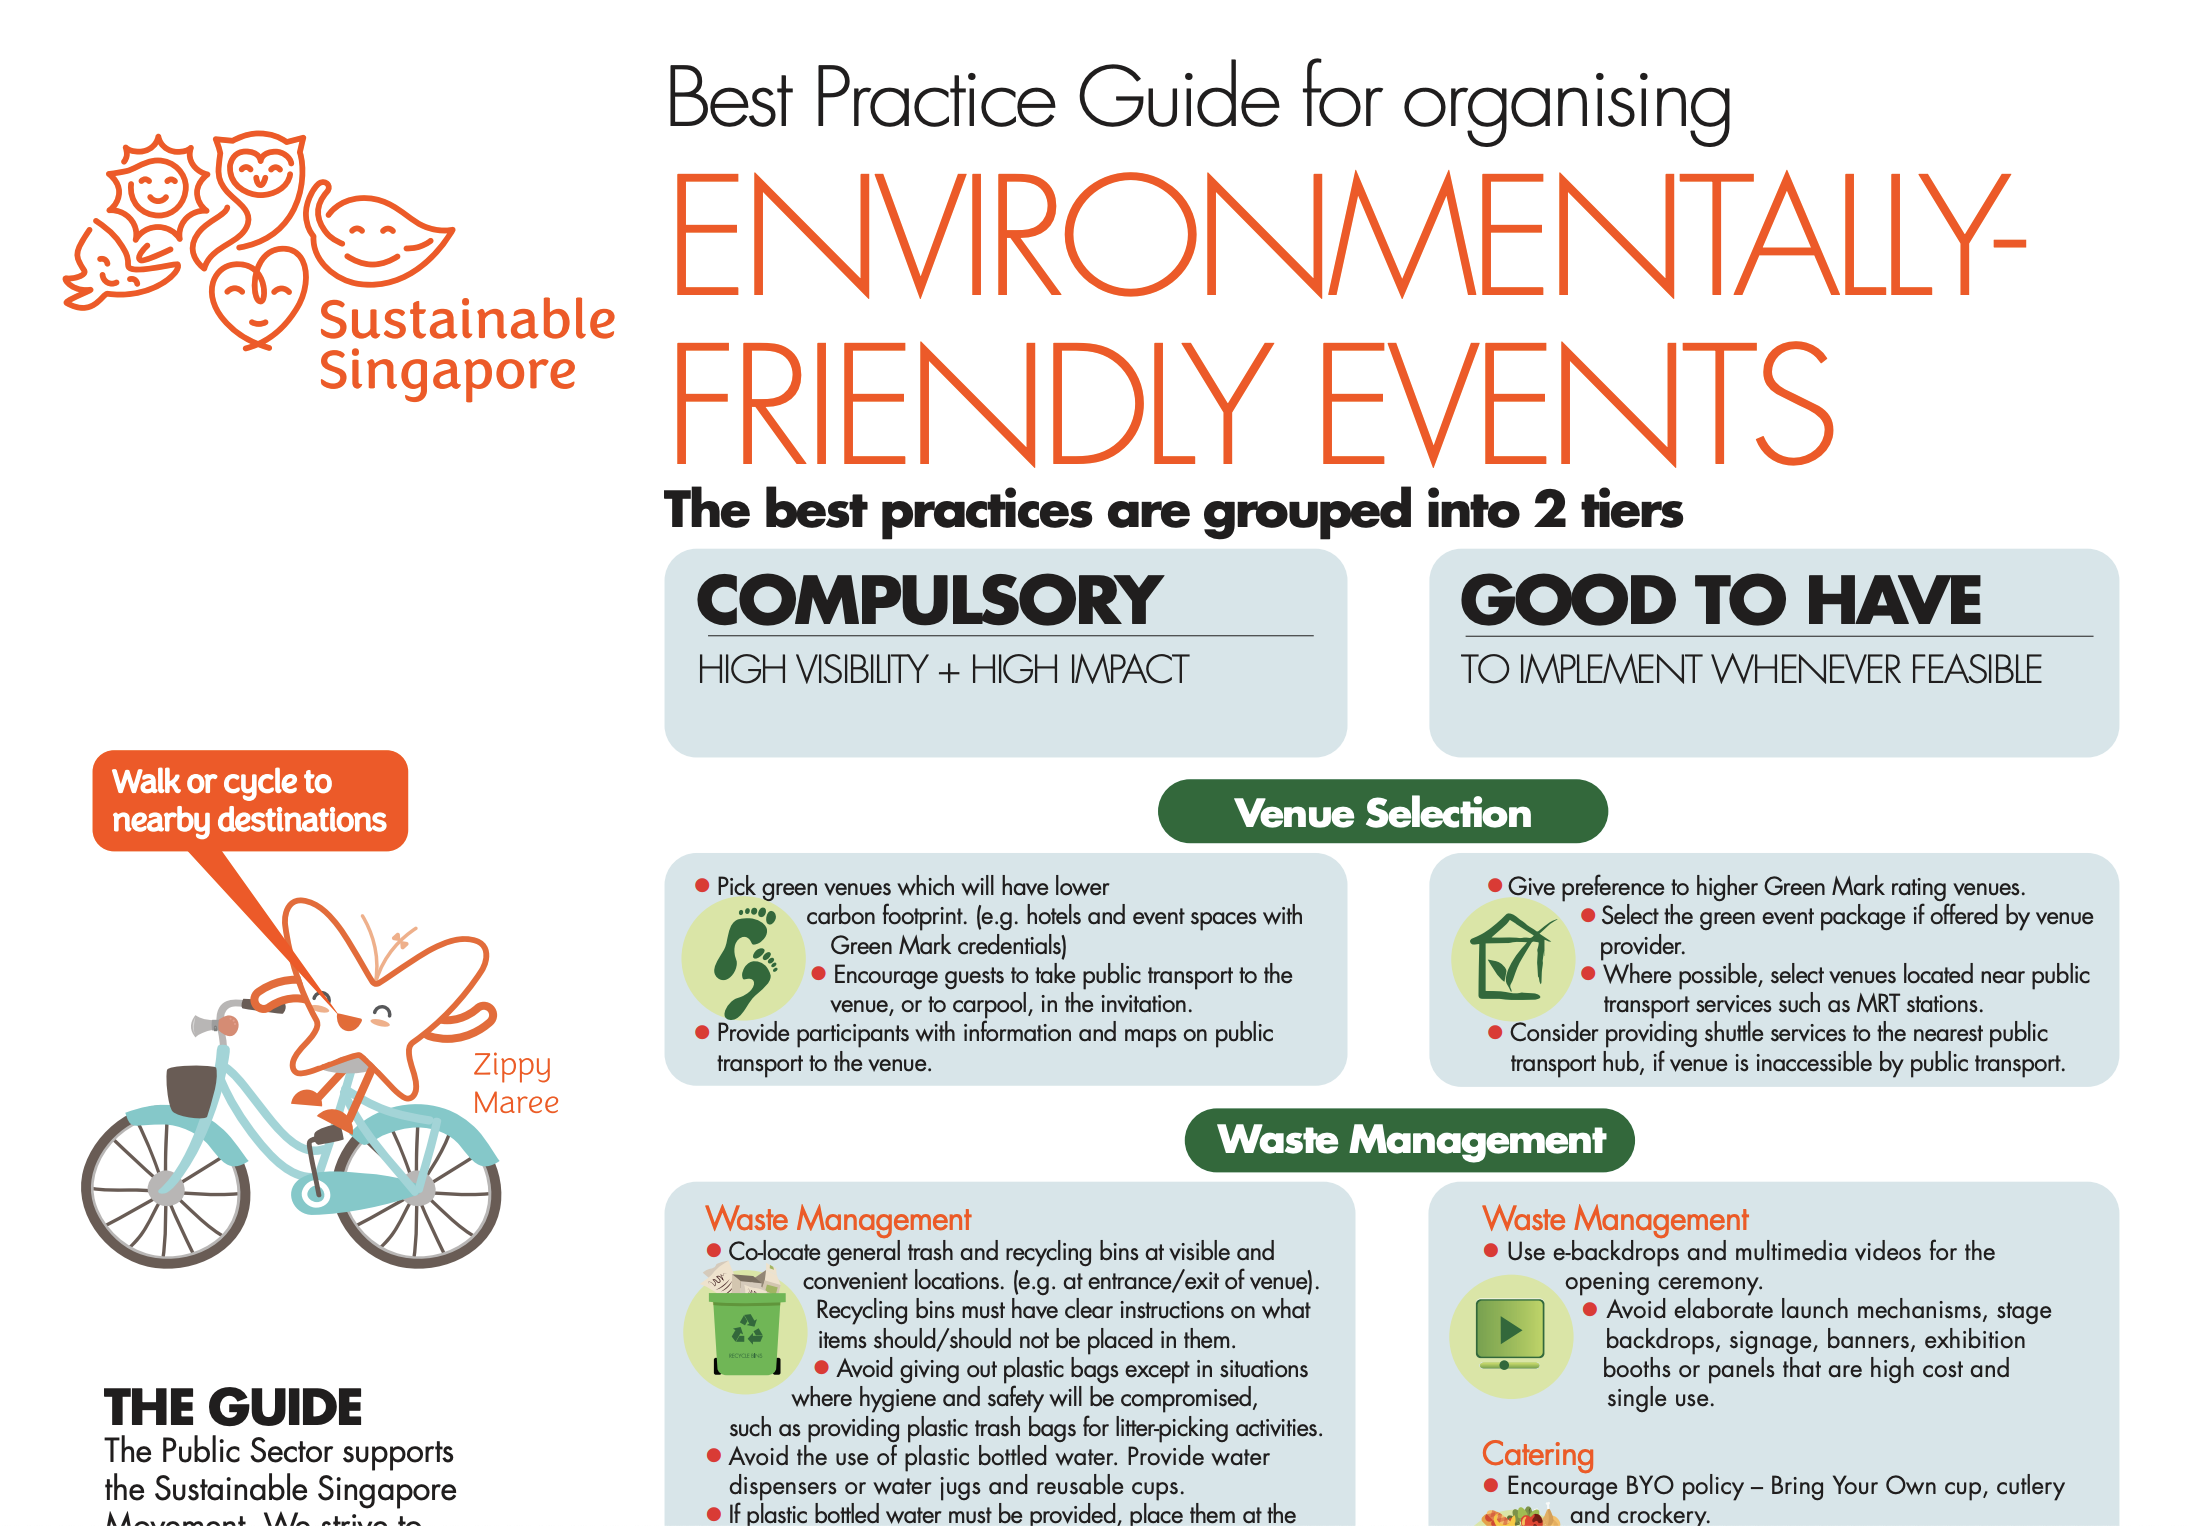 Guide for Environmentally-Friendly Events